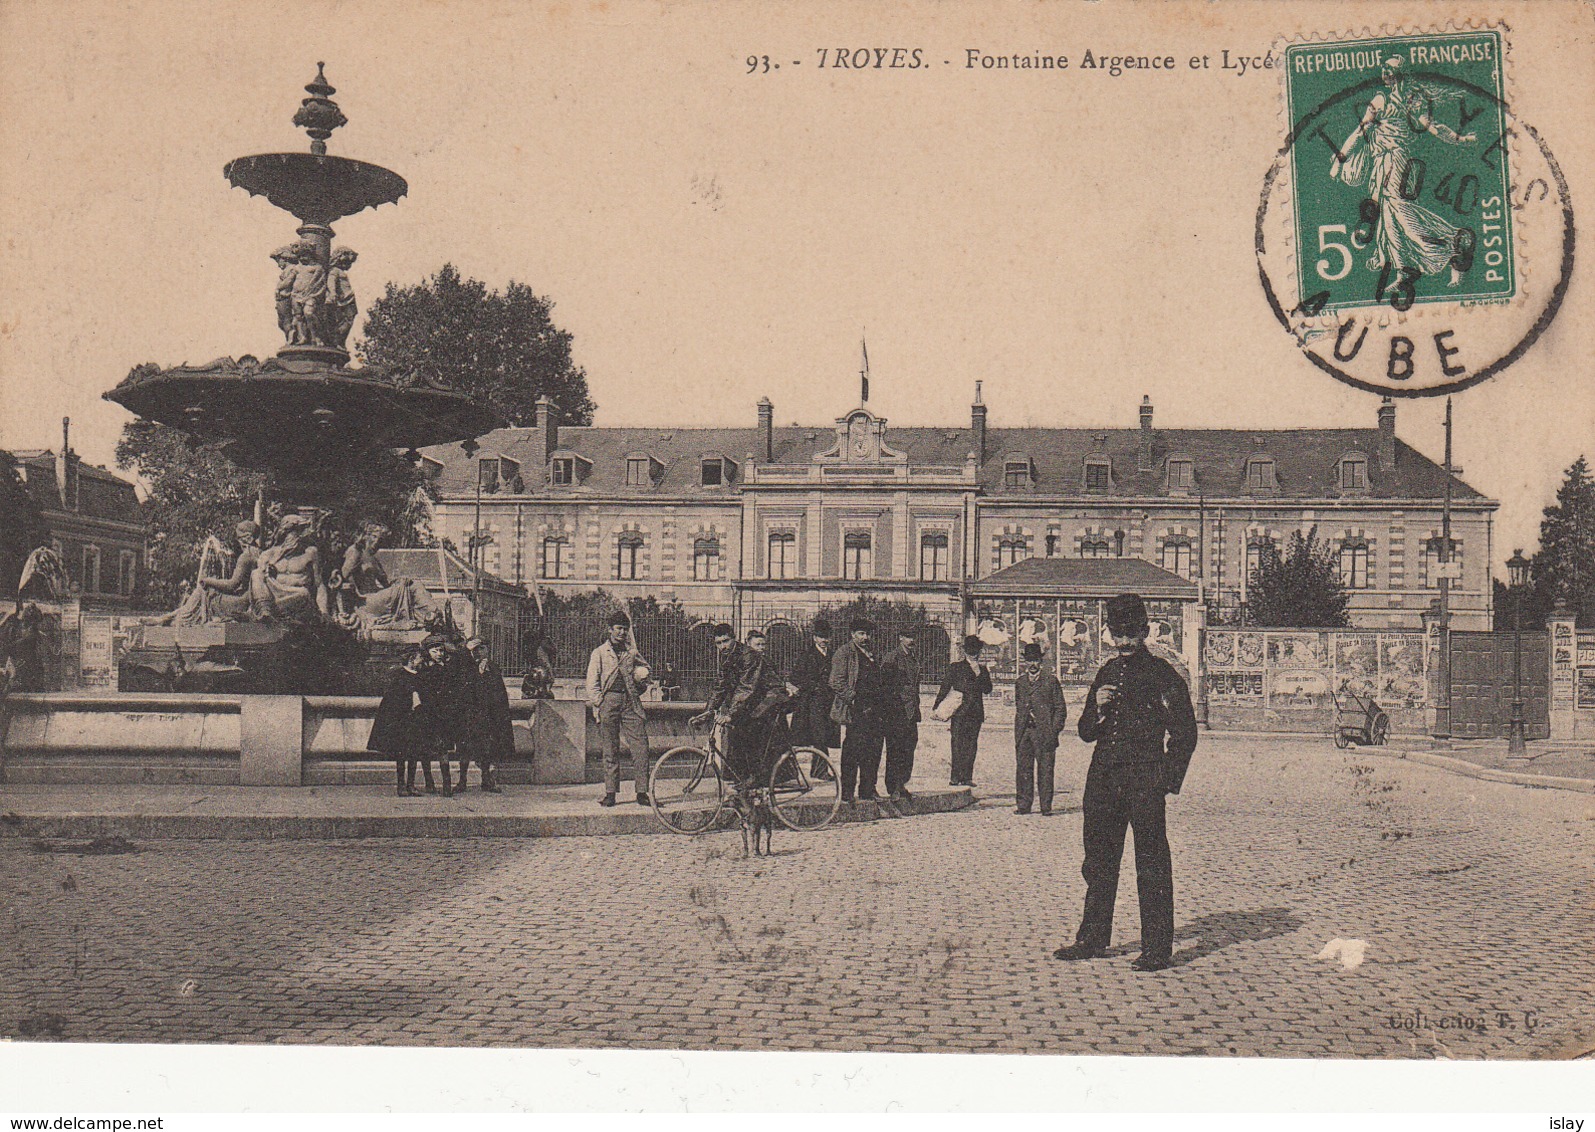 10 - TROYES - Fontaine Argence Et Lycée - Troyes